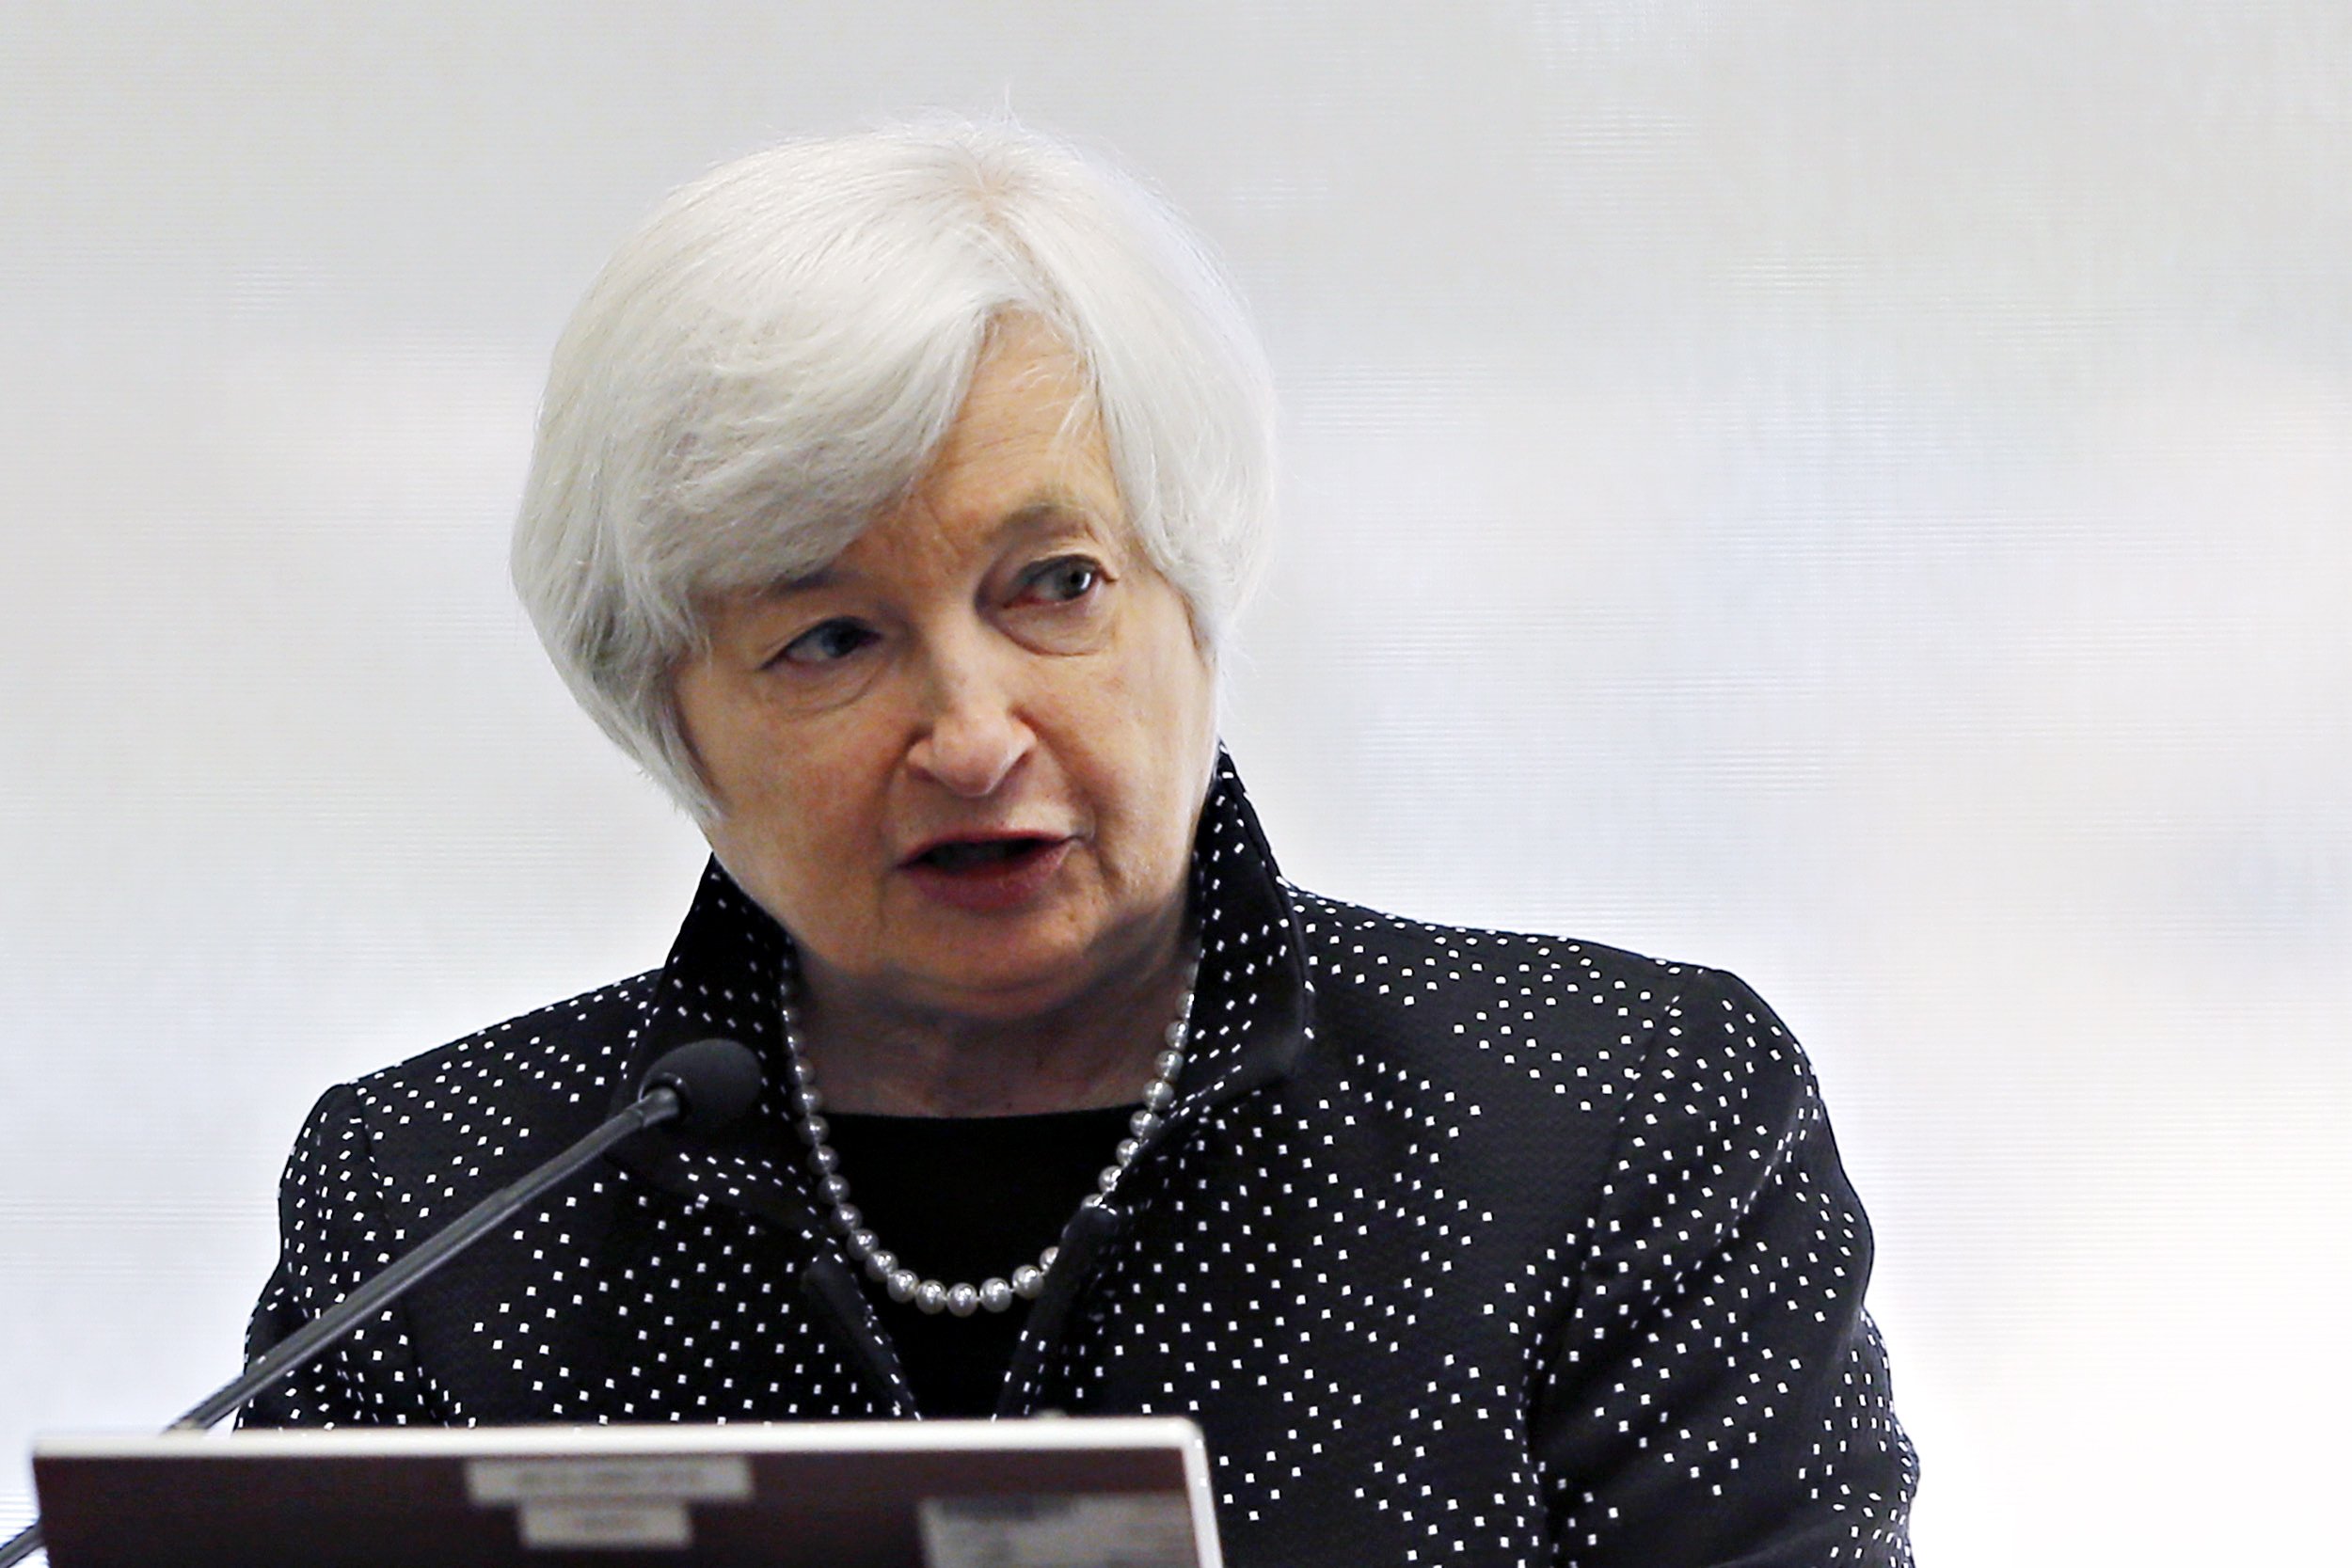 U.S. Federal Reserve Chair Janet Yellen speaks at the Federal Reserve Bank of Boston Economic Conference on Inequality of Economic Opportunity in Boston on Oct. 17, 2014.